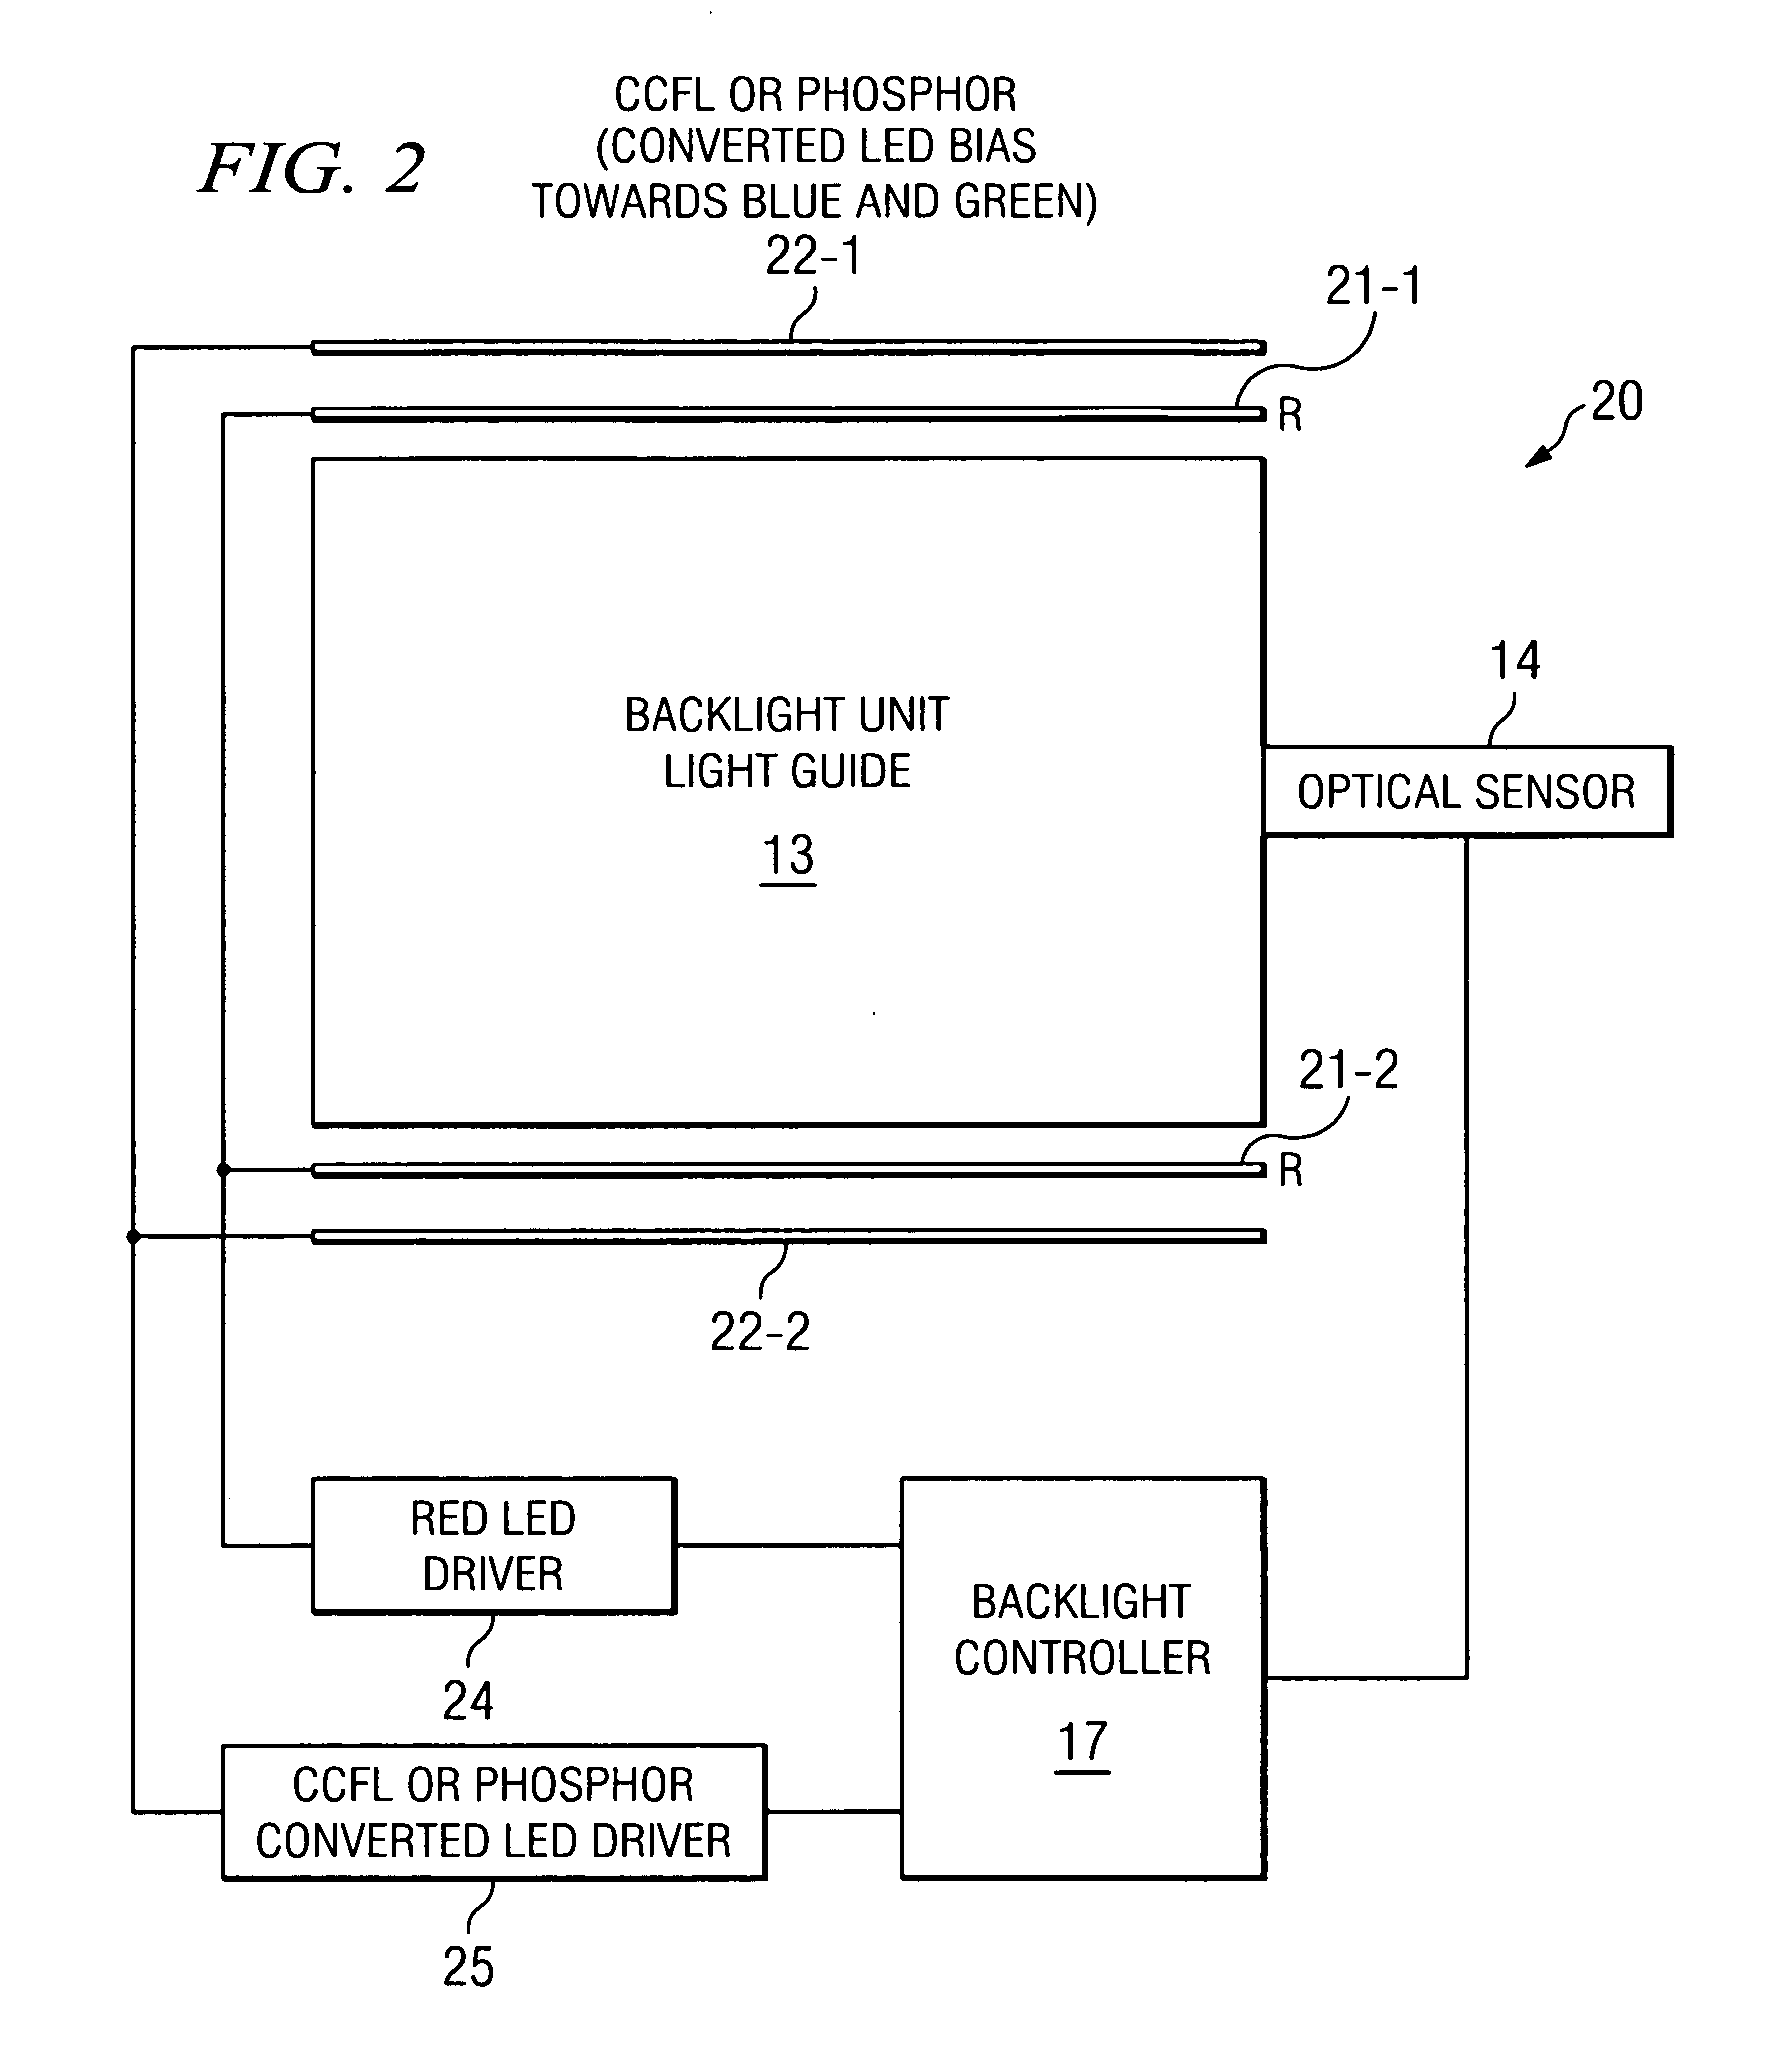 System and method for constructing a backlighted display using dynamically optimized light source